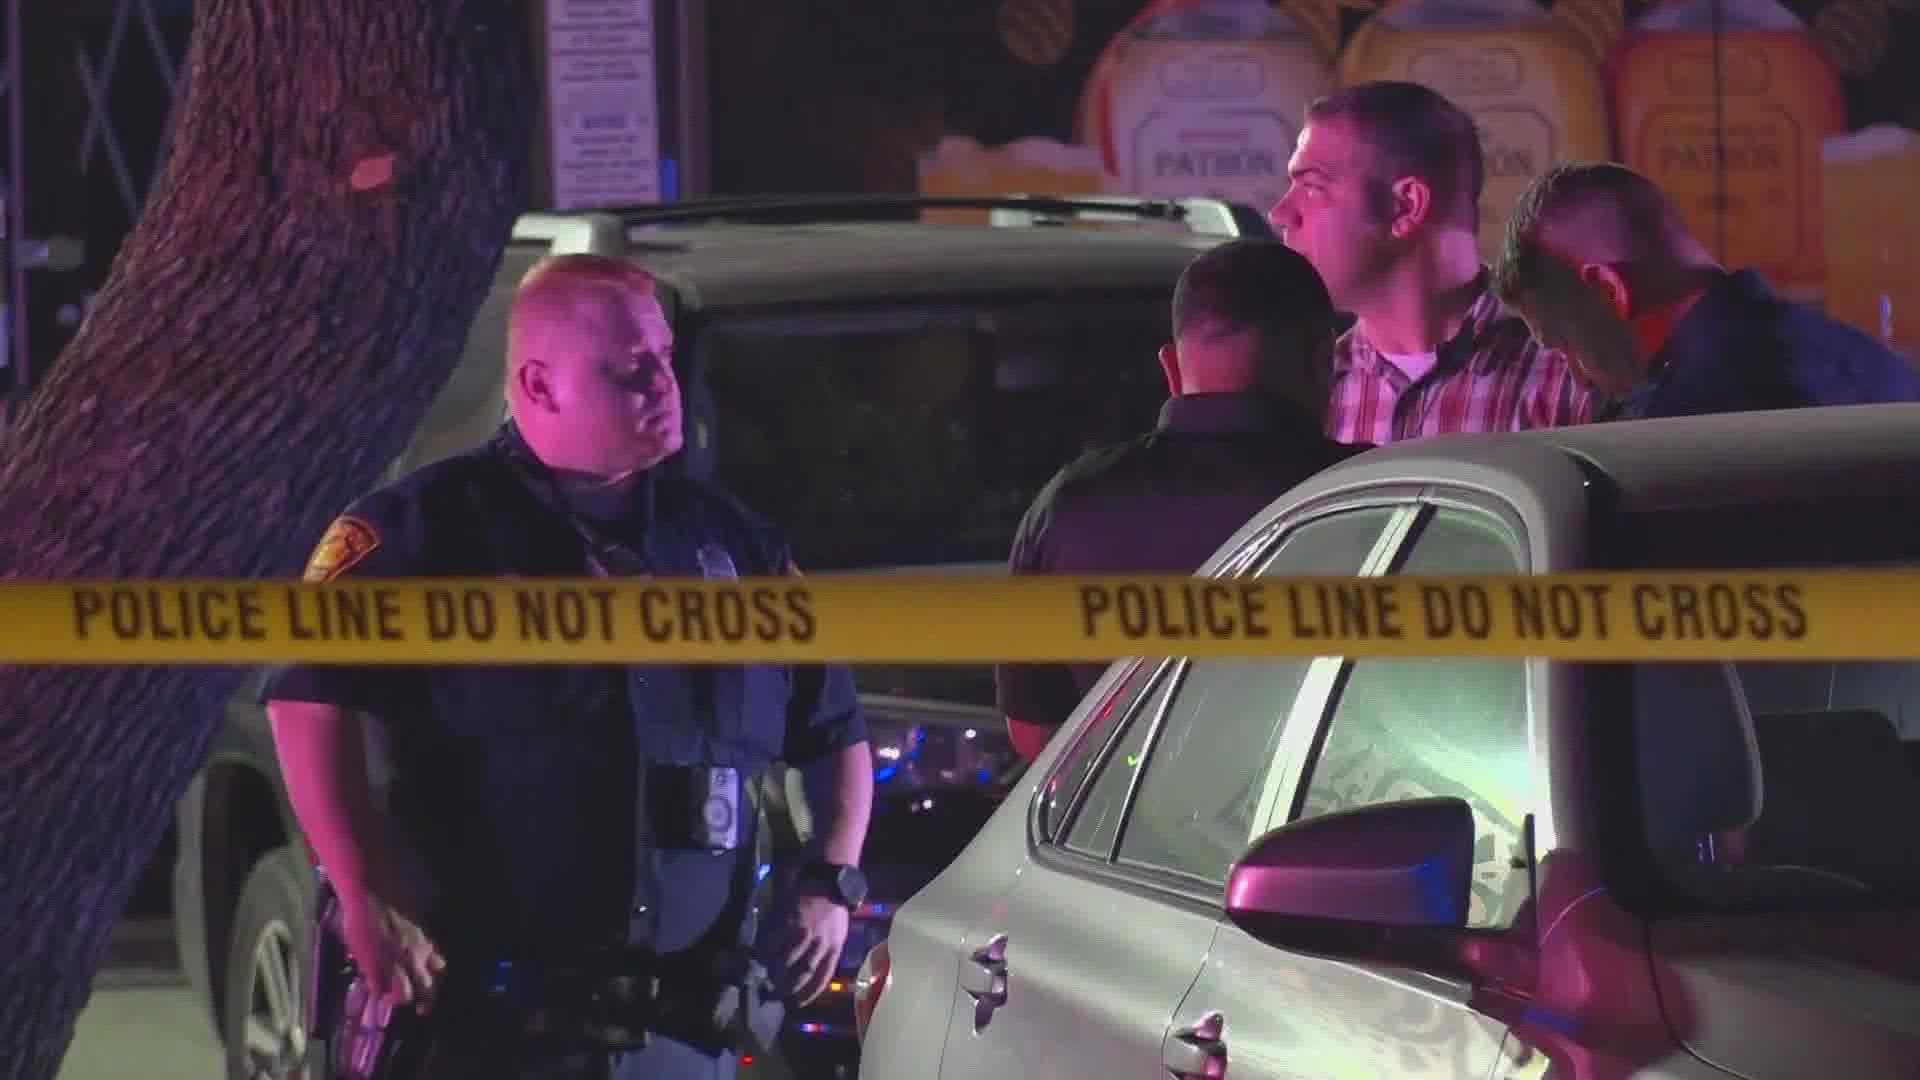 Officials say two men pulled up to the bar when they were stabbed and knocked out.